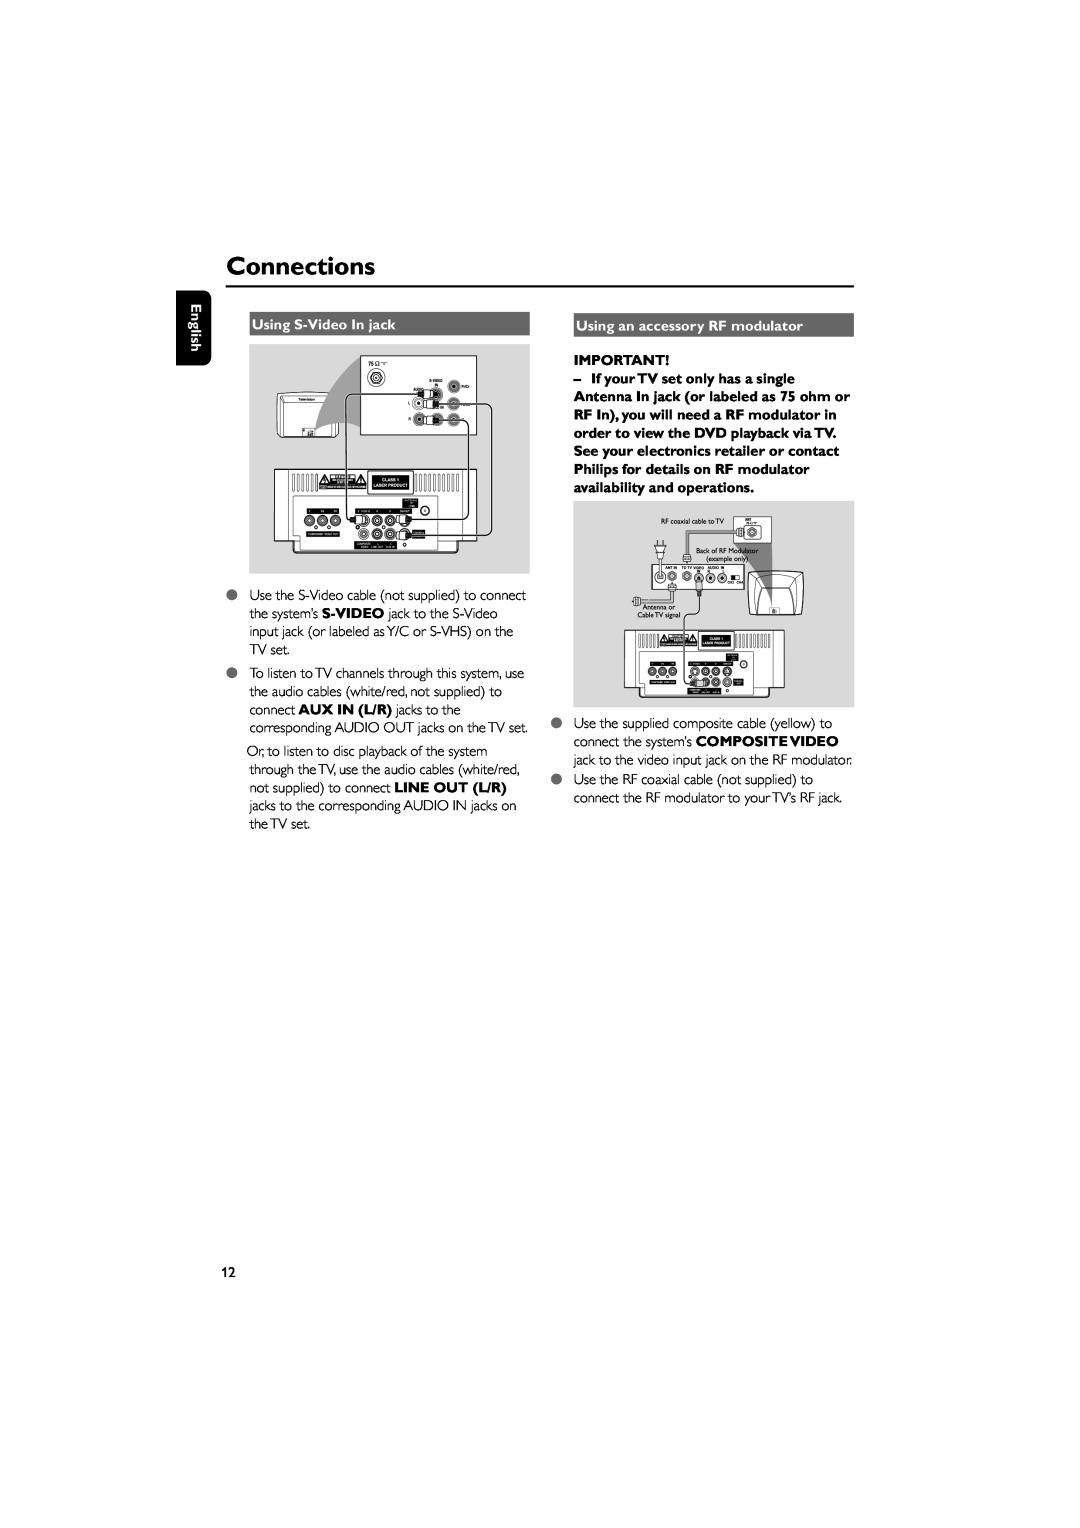 Philips MCD139B owner manual Connections, English, Using S-VideoIn jack, Using an accessory RF modulator 